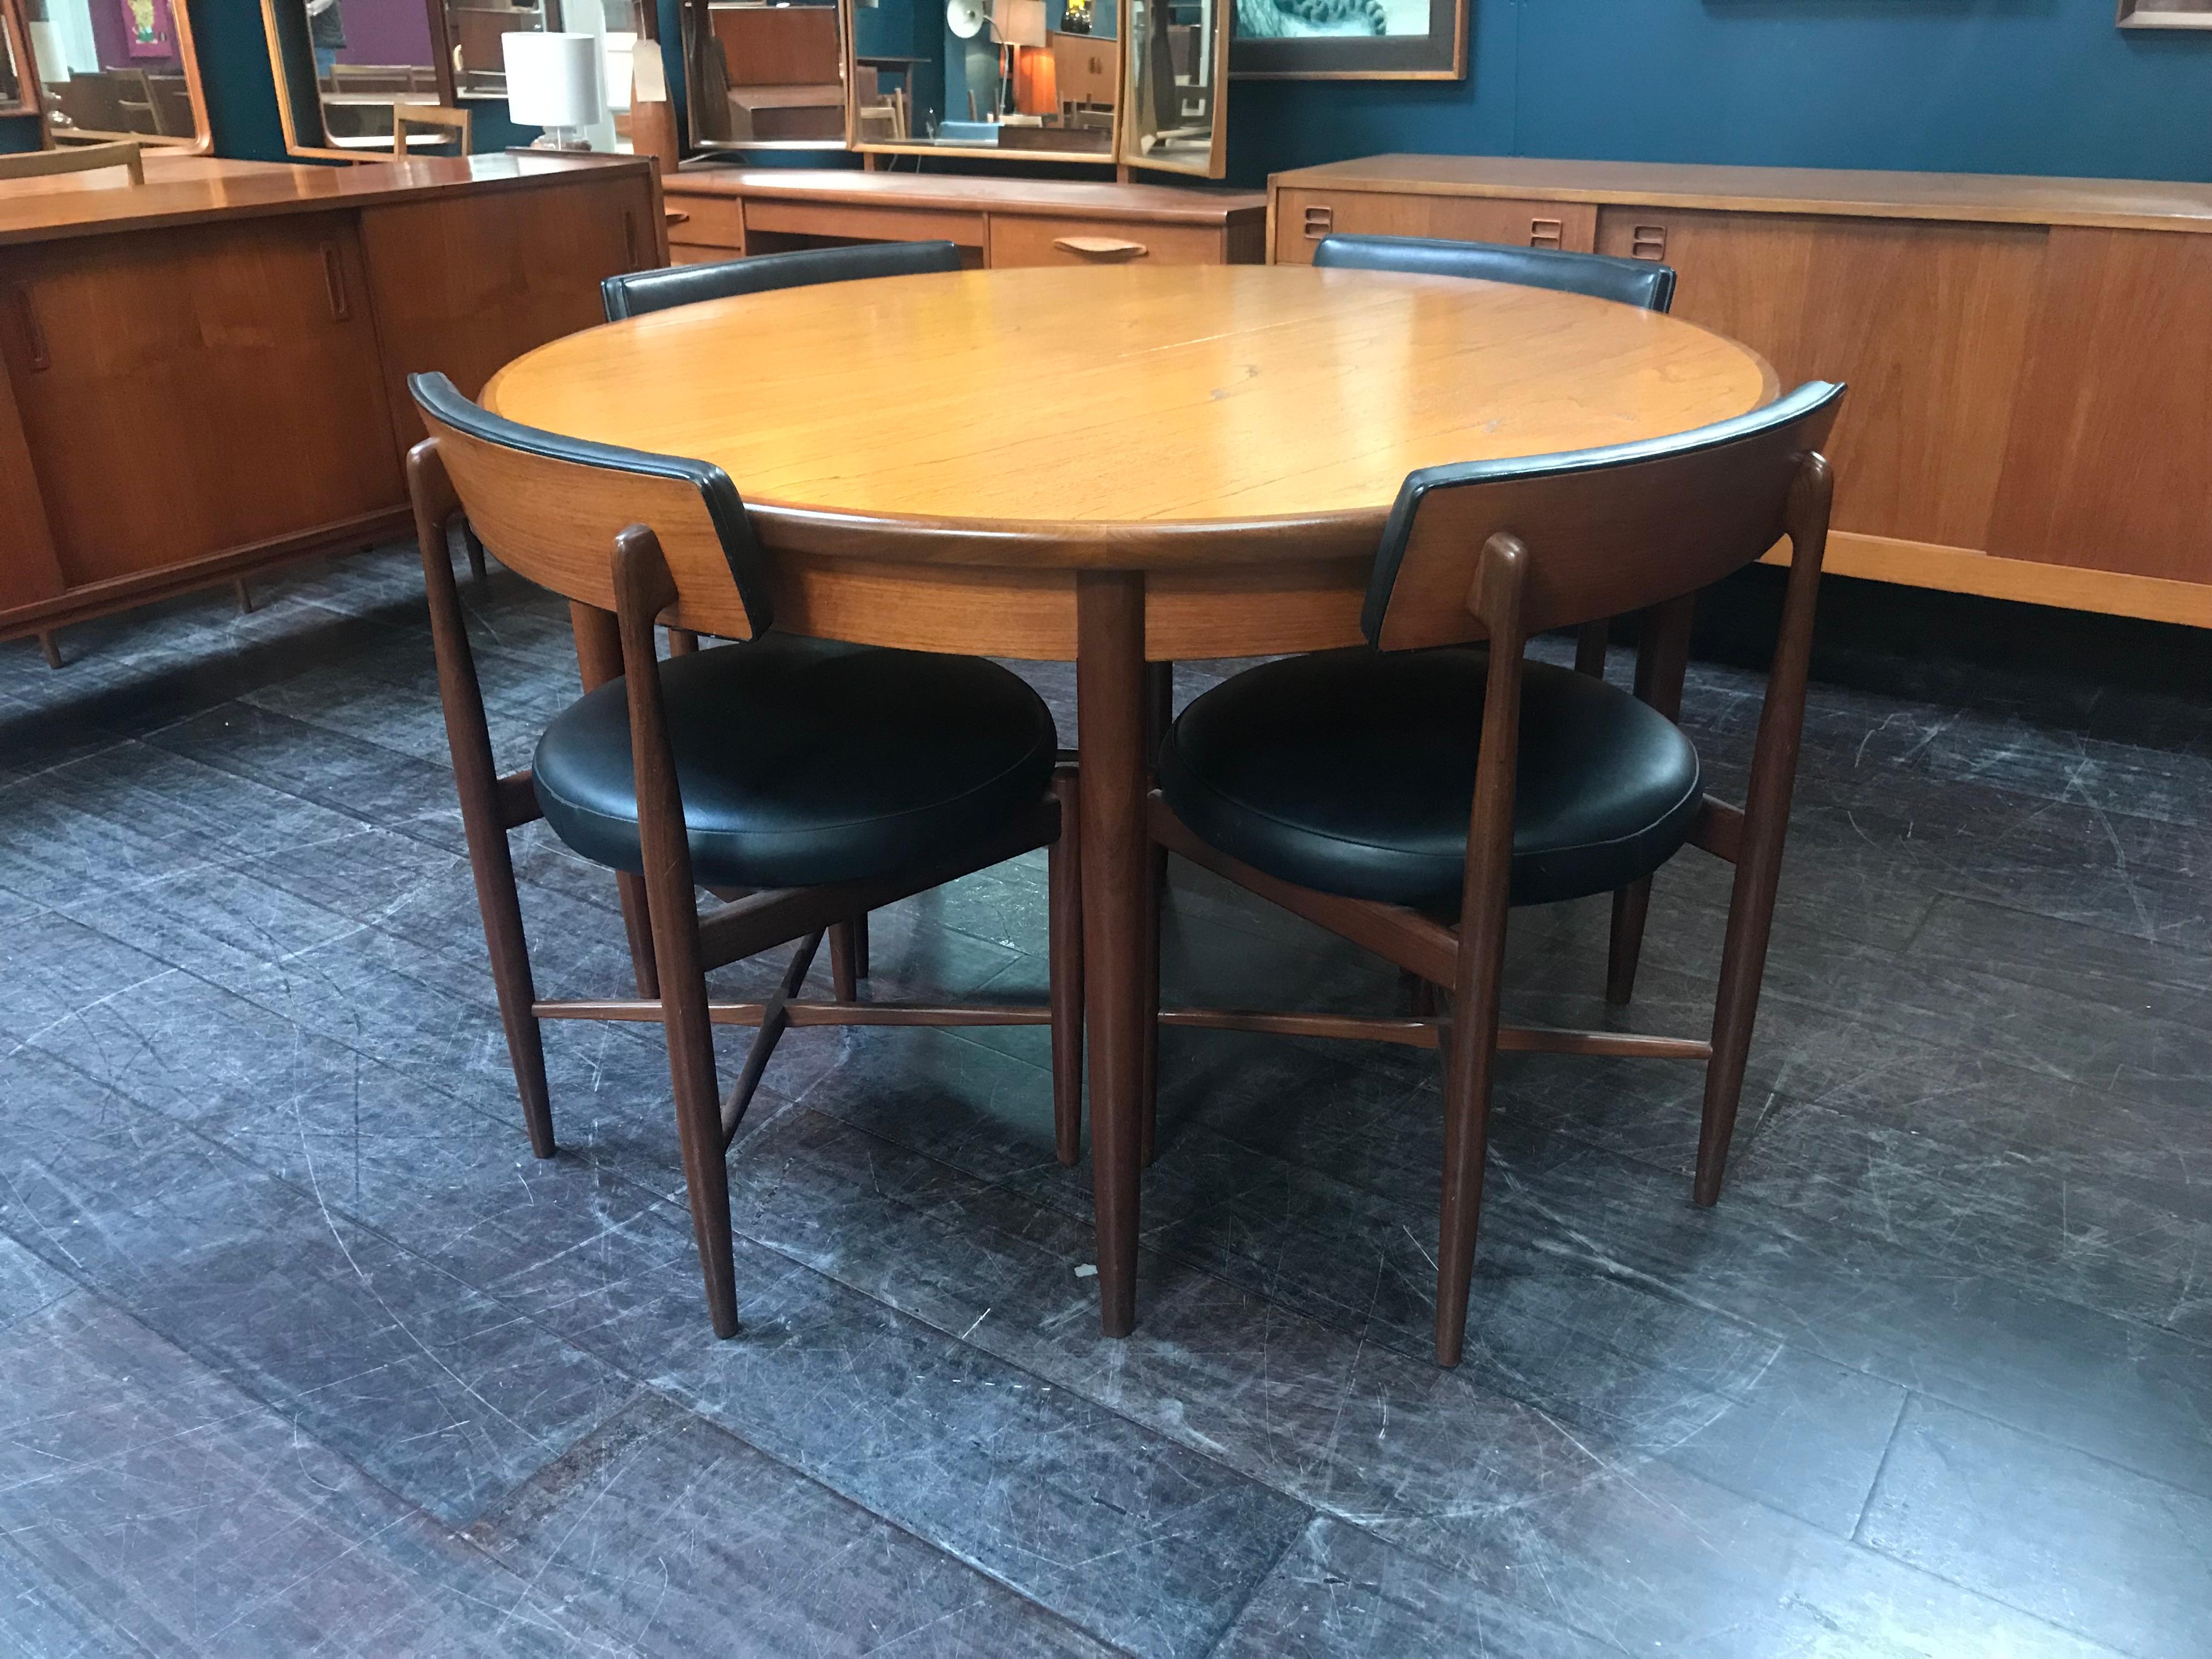 English British Midcentury Teak Dining Table G Plan with 4 Chairs by Ib Kofod-Larsen For Sale